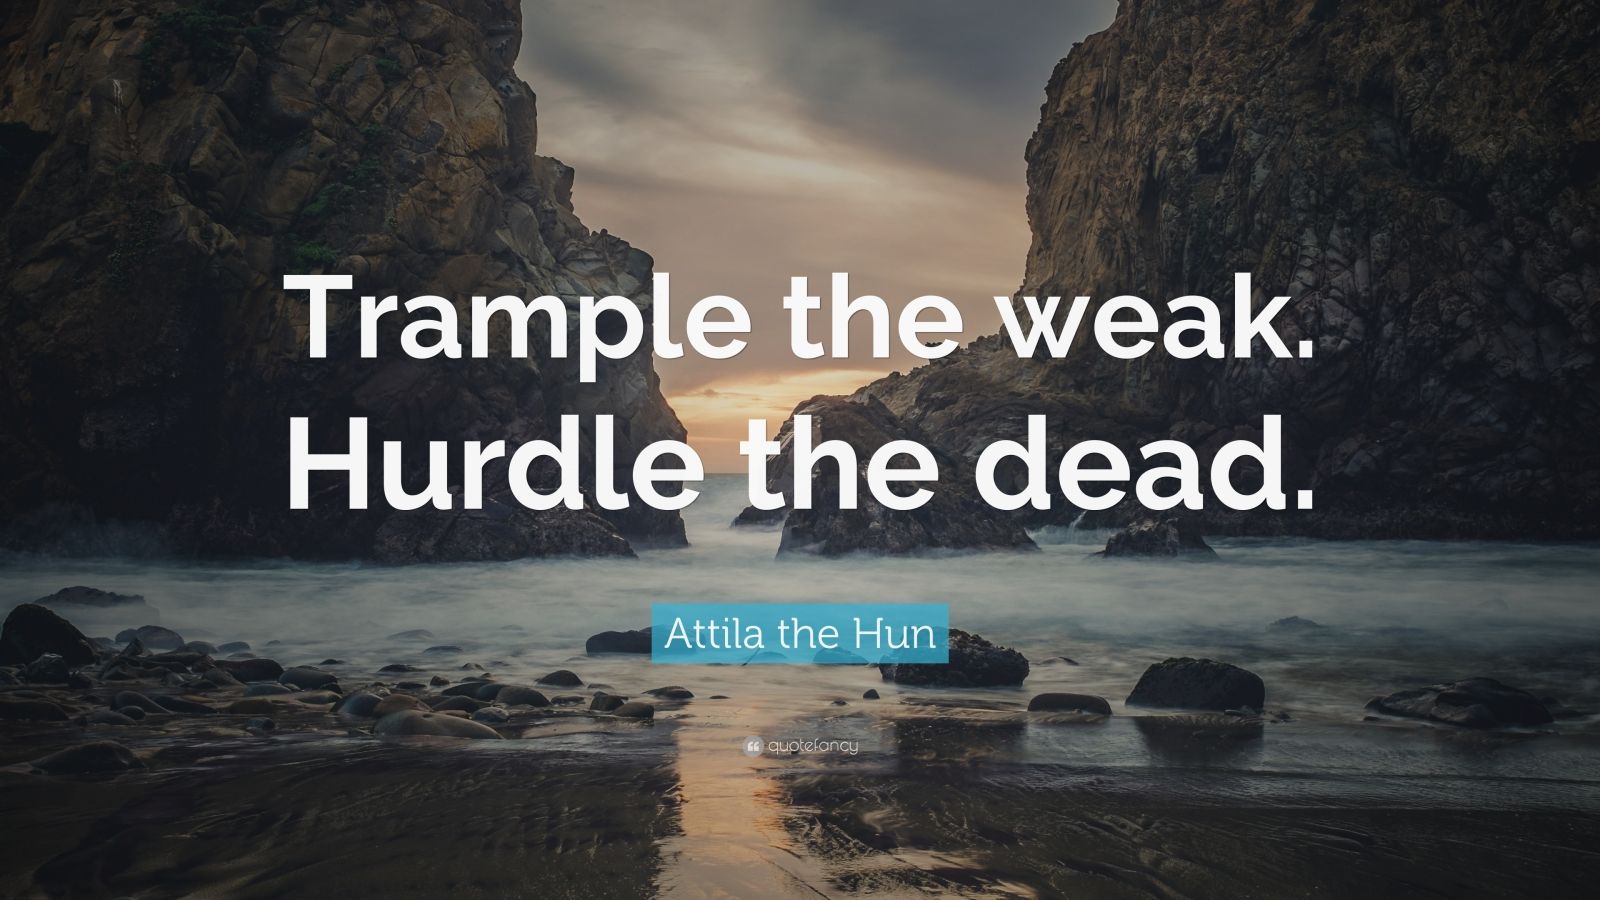 Attila the Hun Quote: "Trample the weak. Hurdle the dead." (7 wallpapers) - Quotefancy